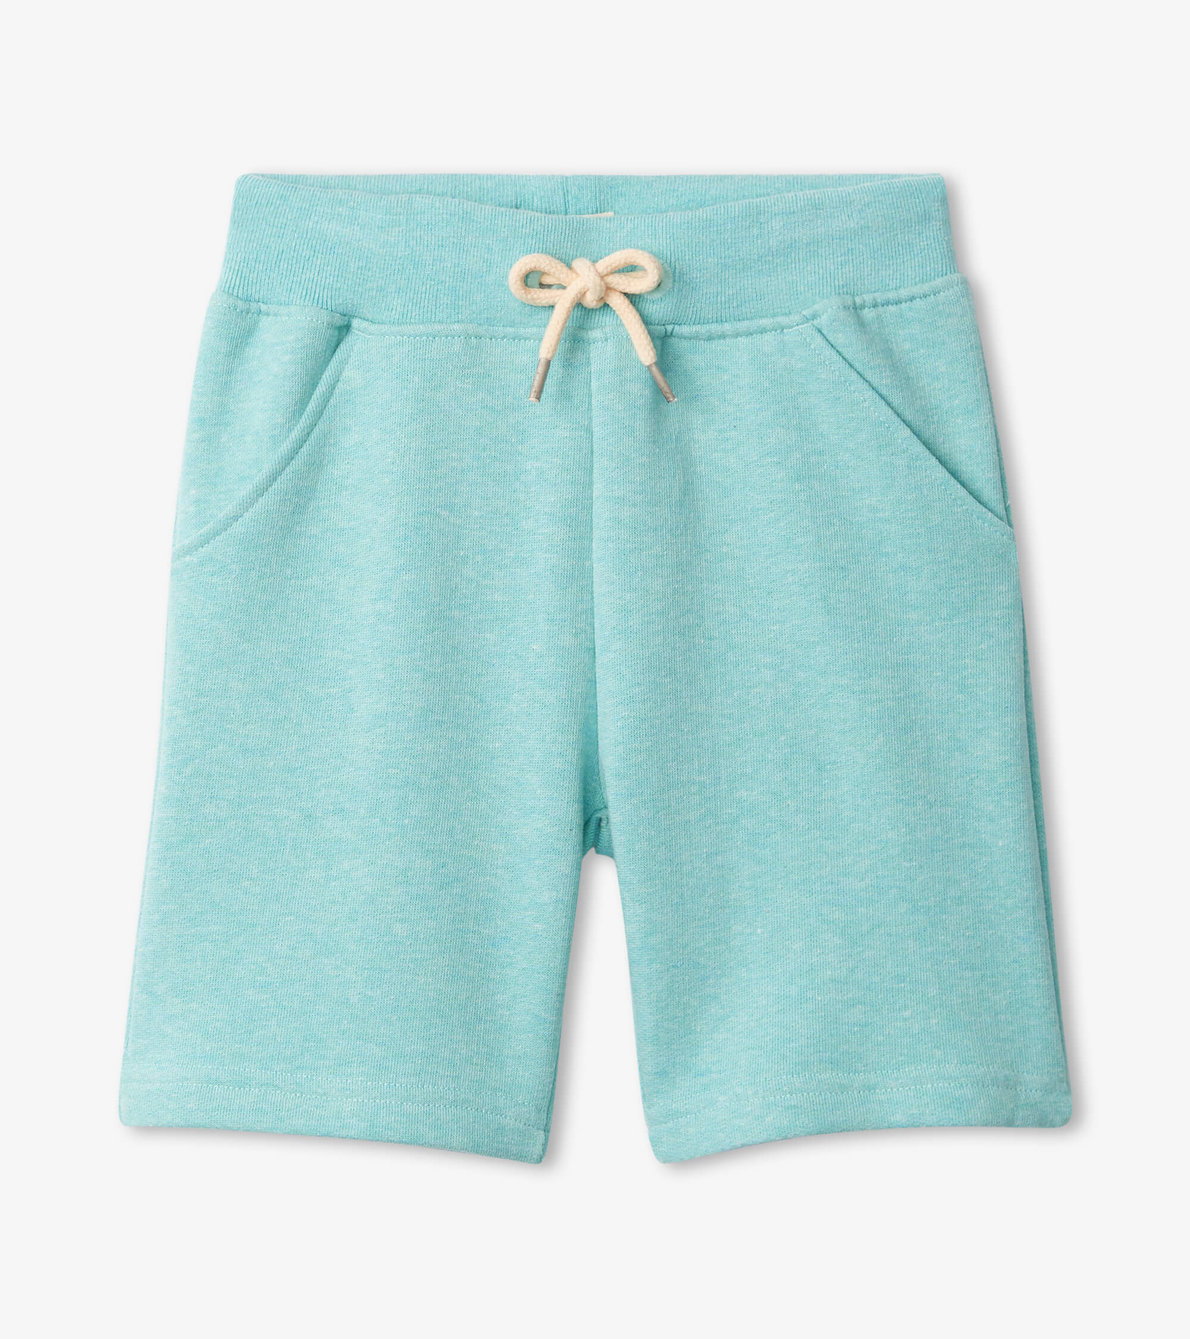 View larger image of Aqua Terry Shorts